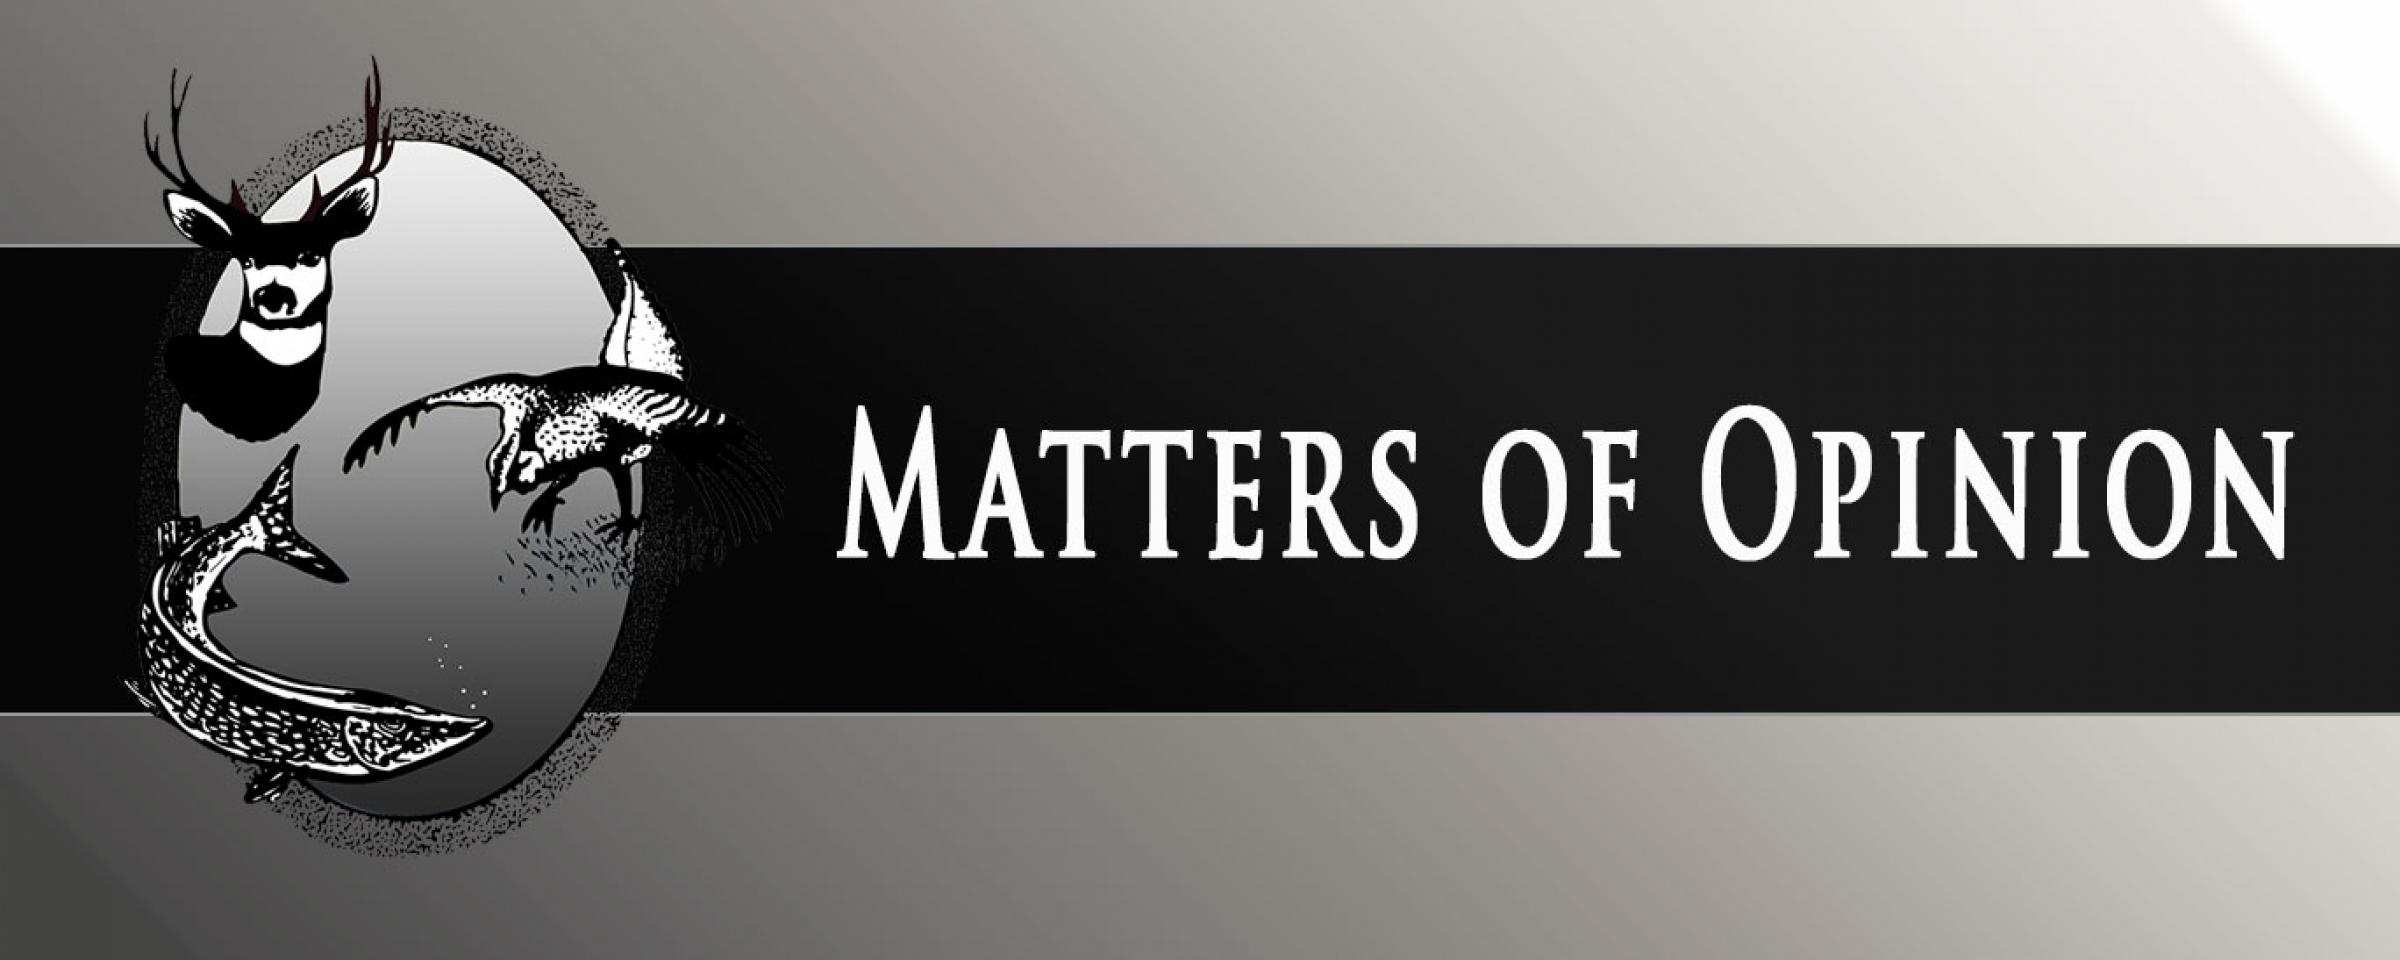 Matters title graphic